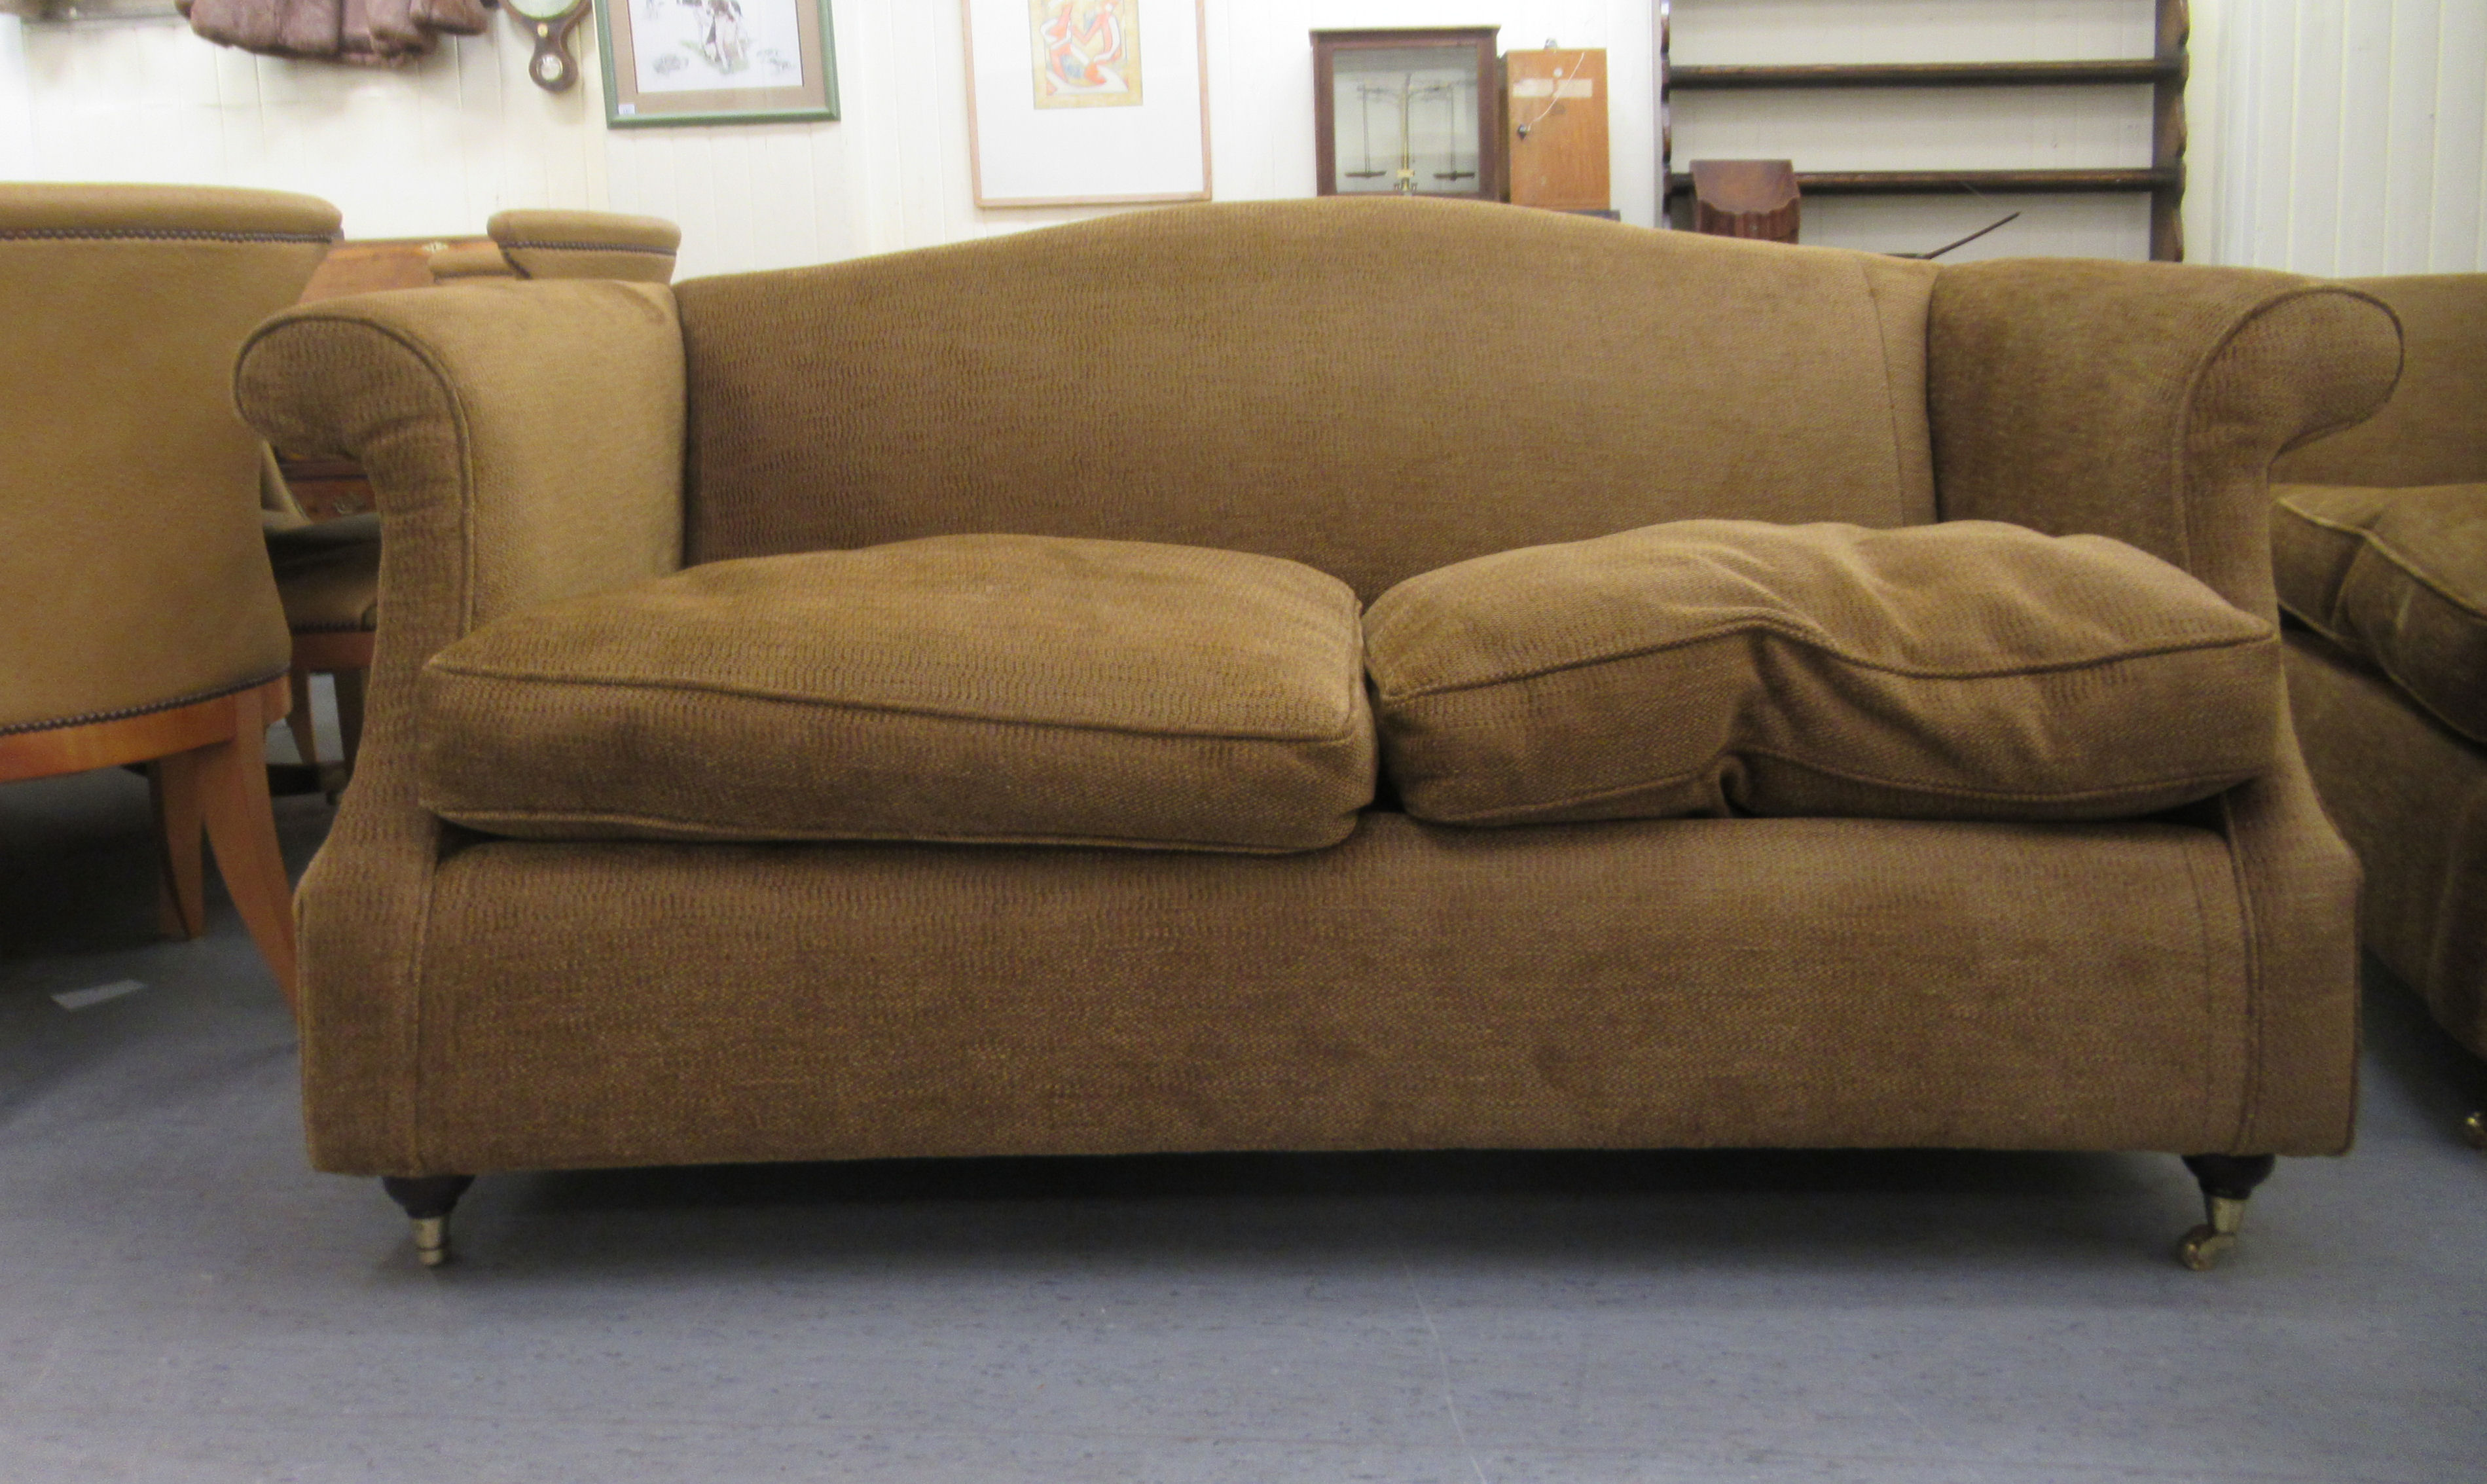 A modern textured fabric upholstered two person settee with an arched back and level arms, raised on